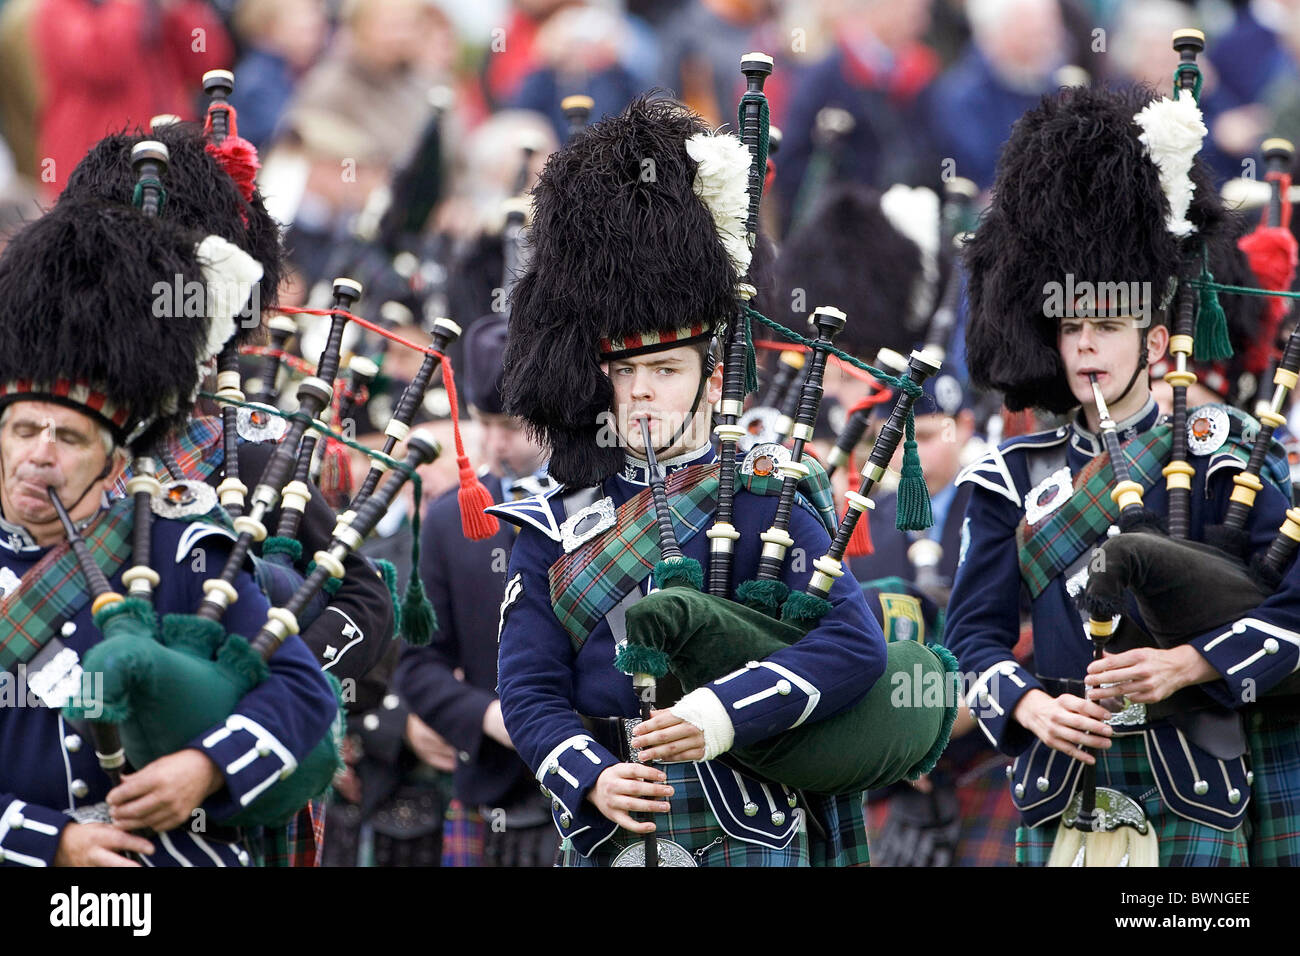 Marching pipe band with bagpipes at the Braemar Games Highland gathering annual event in SCOTLAND Stock Photo